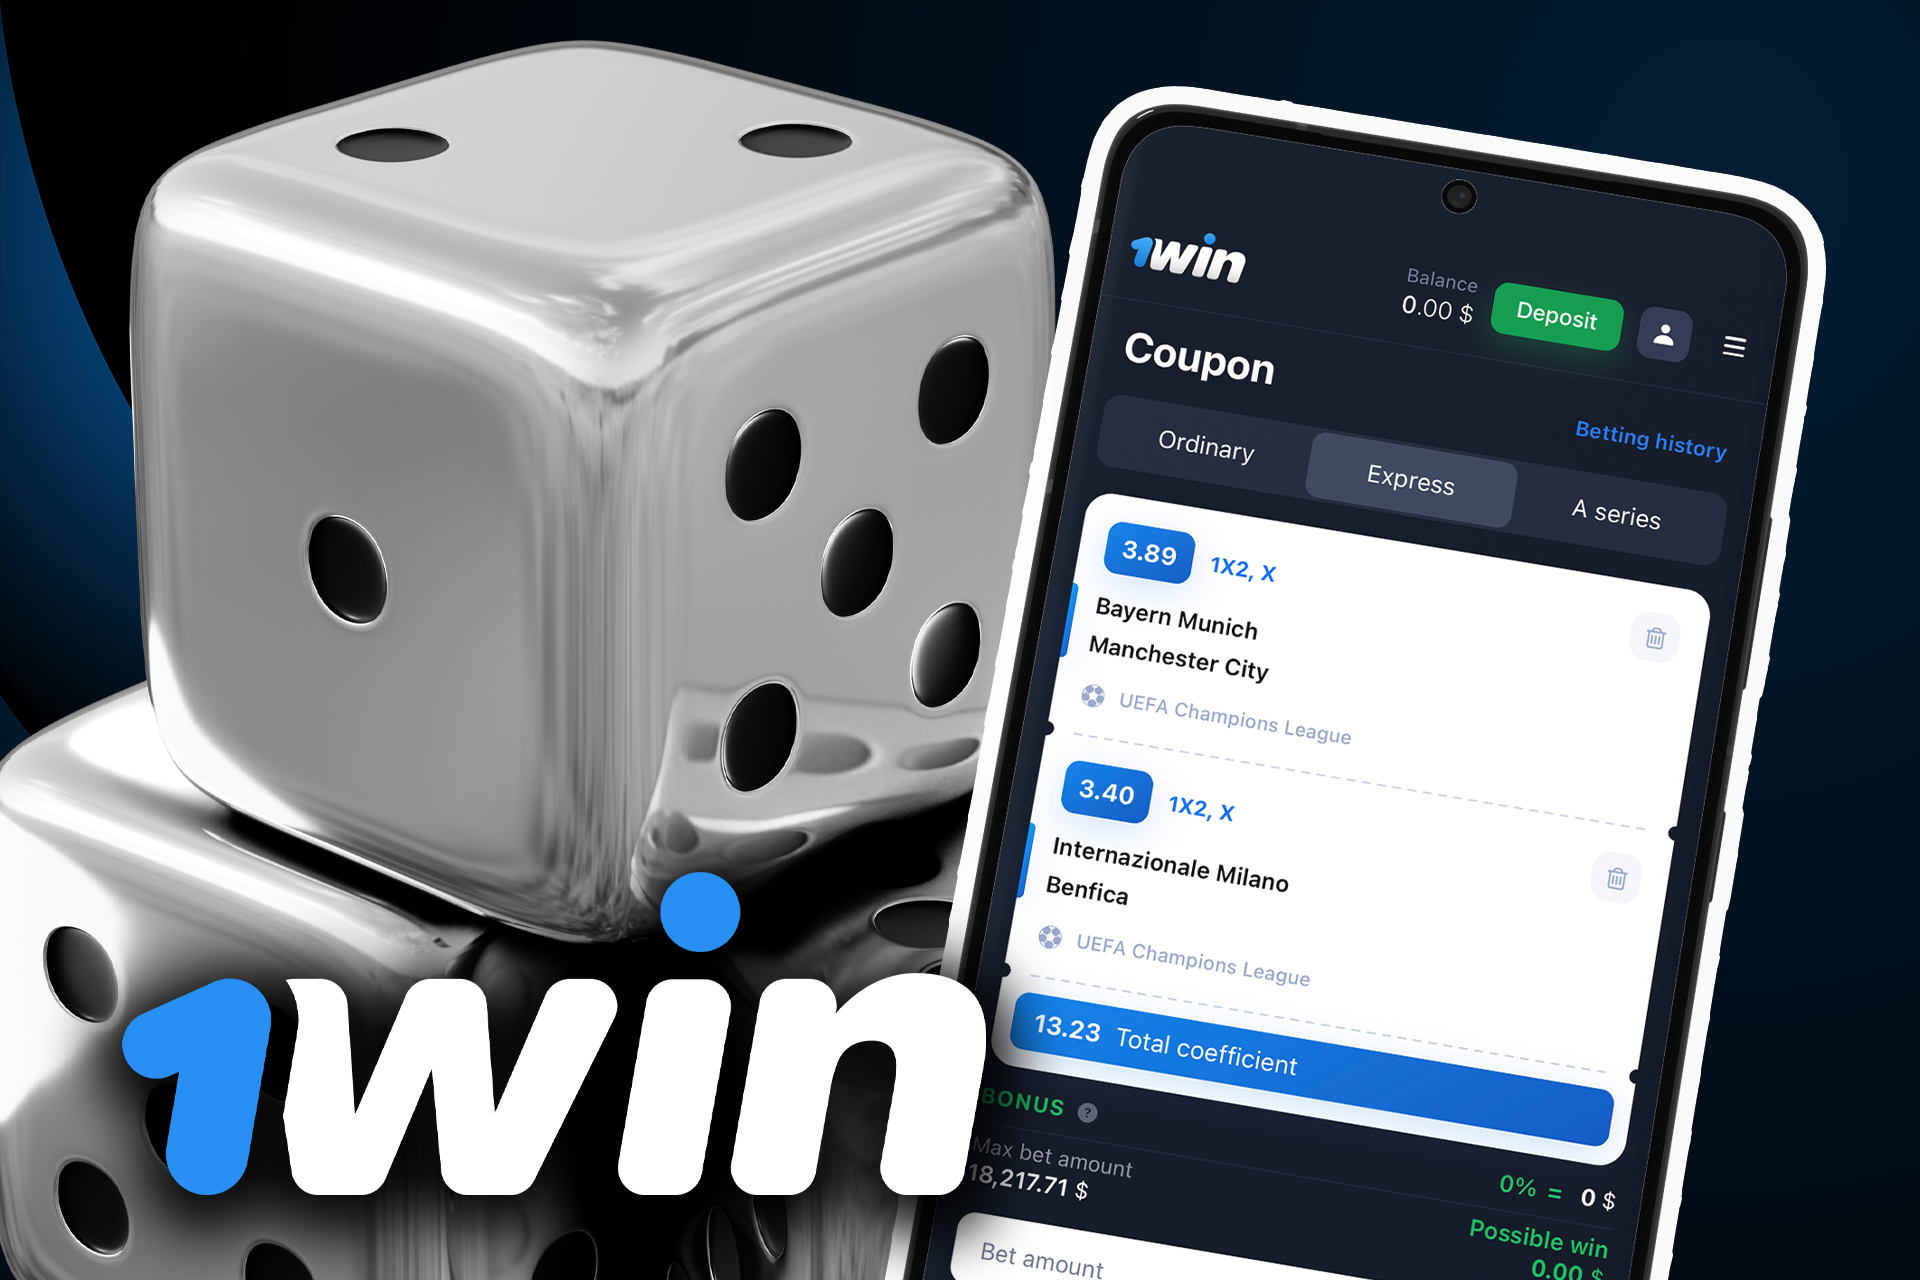 Place bets on different outcomes in the 1win mobile sportsbook.